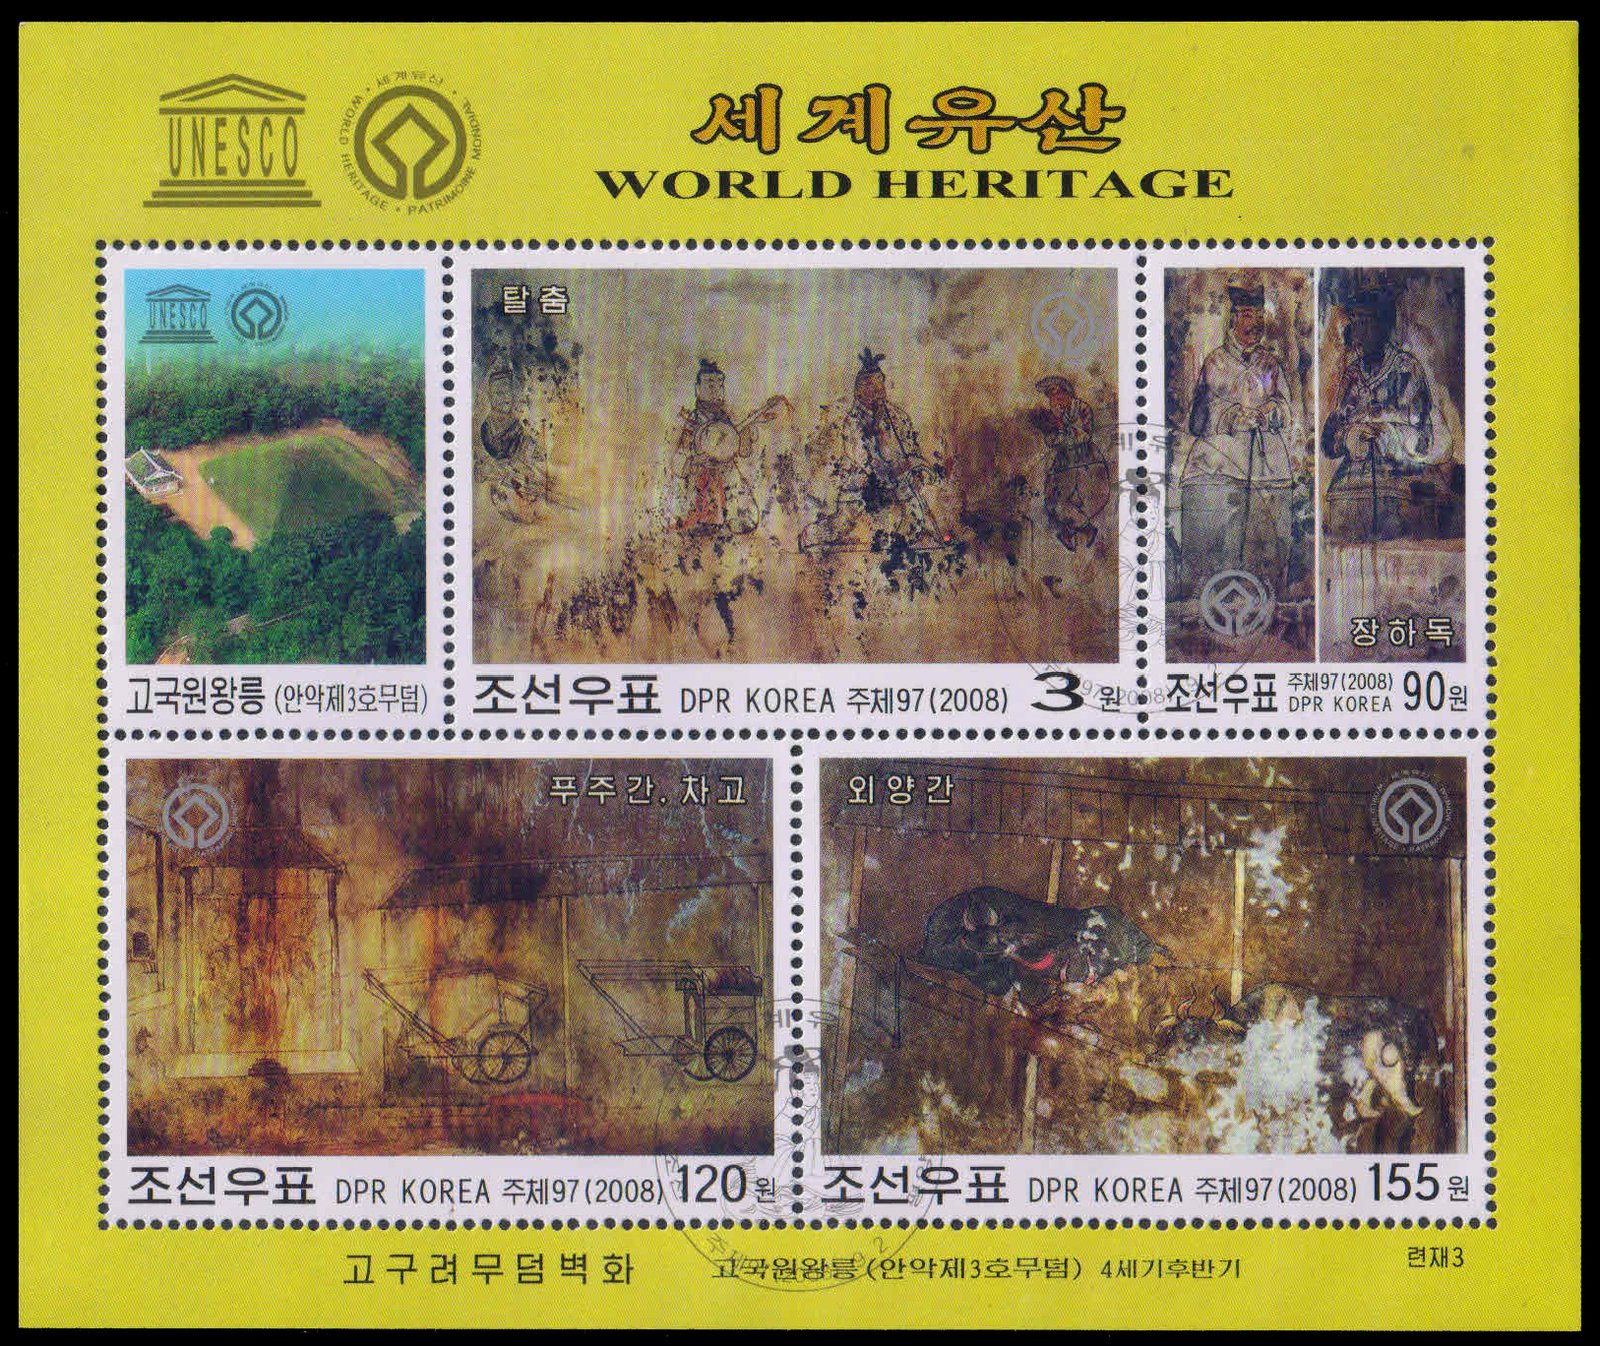 NORTH KOREA 2008-World Heritage Sites, King Kogutewon Tomb, Murals, Dance, Stable, Butchery, M/S of 4 Stamps+1 Label-First Day Cancelled, S.G. MS N 4785